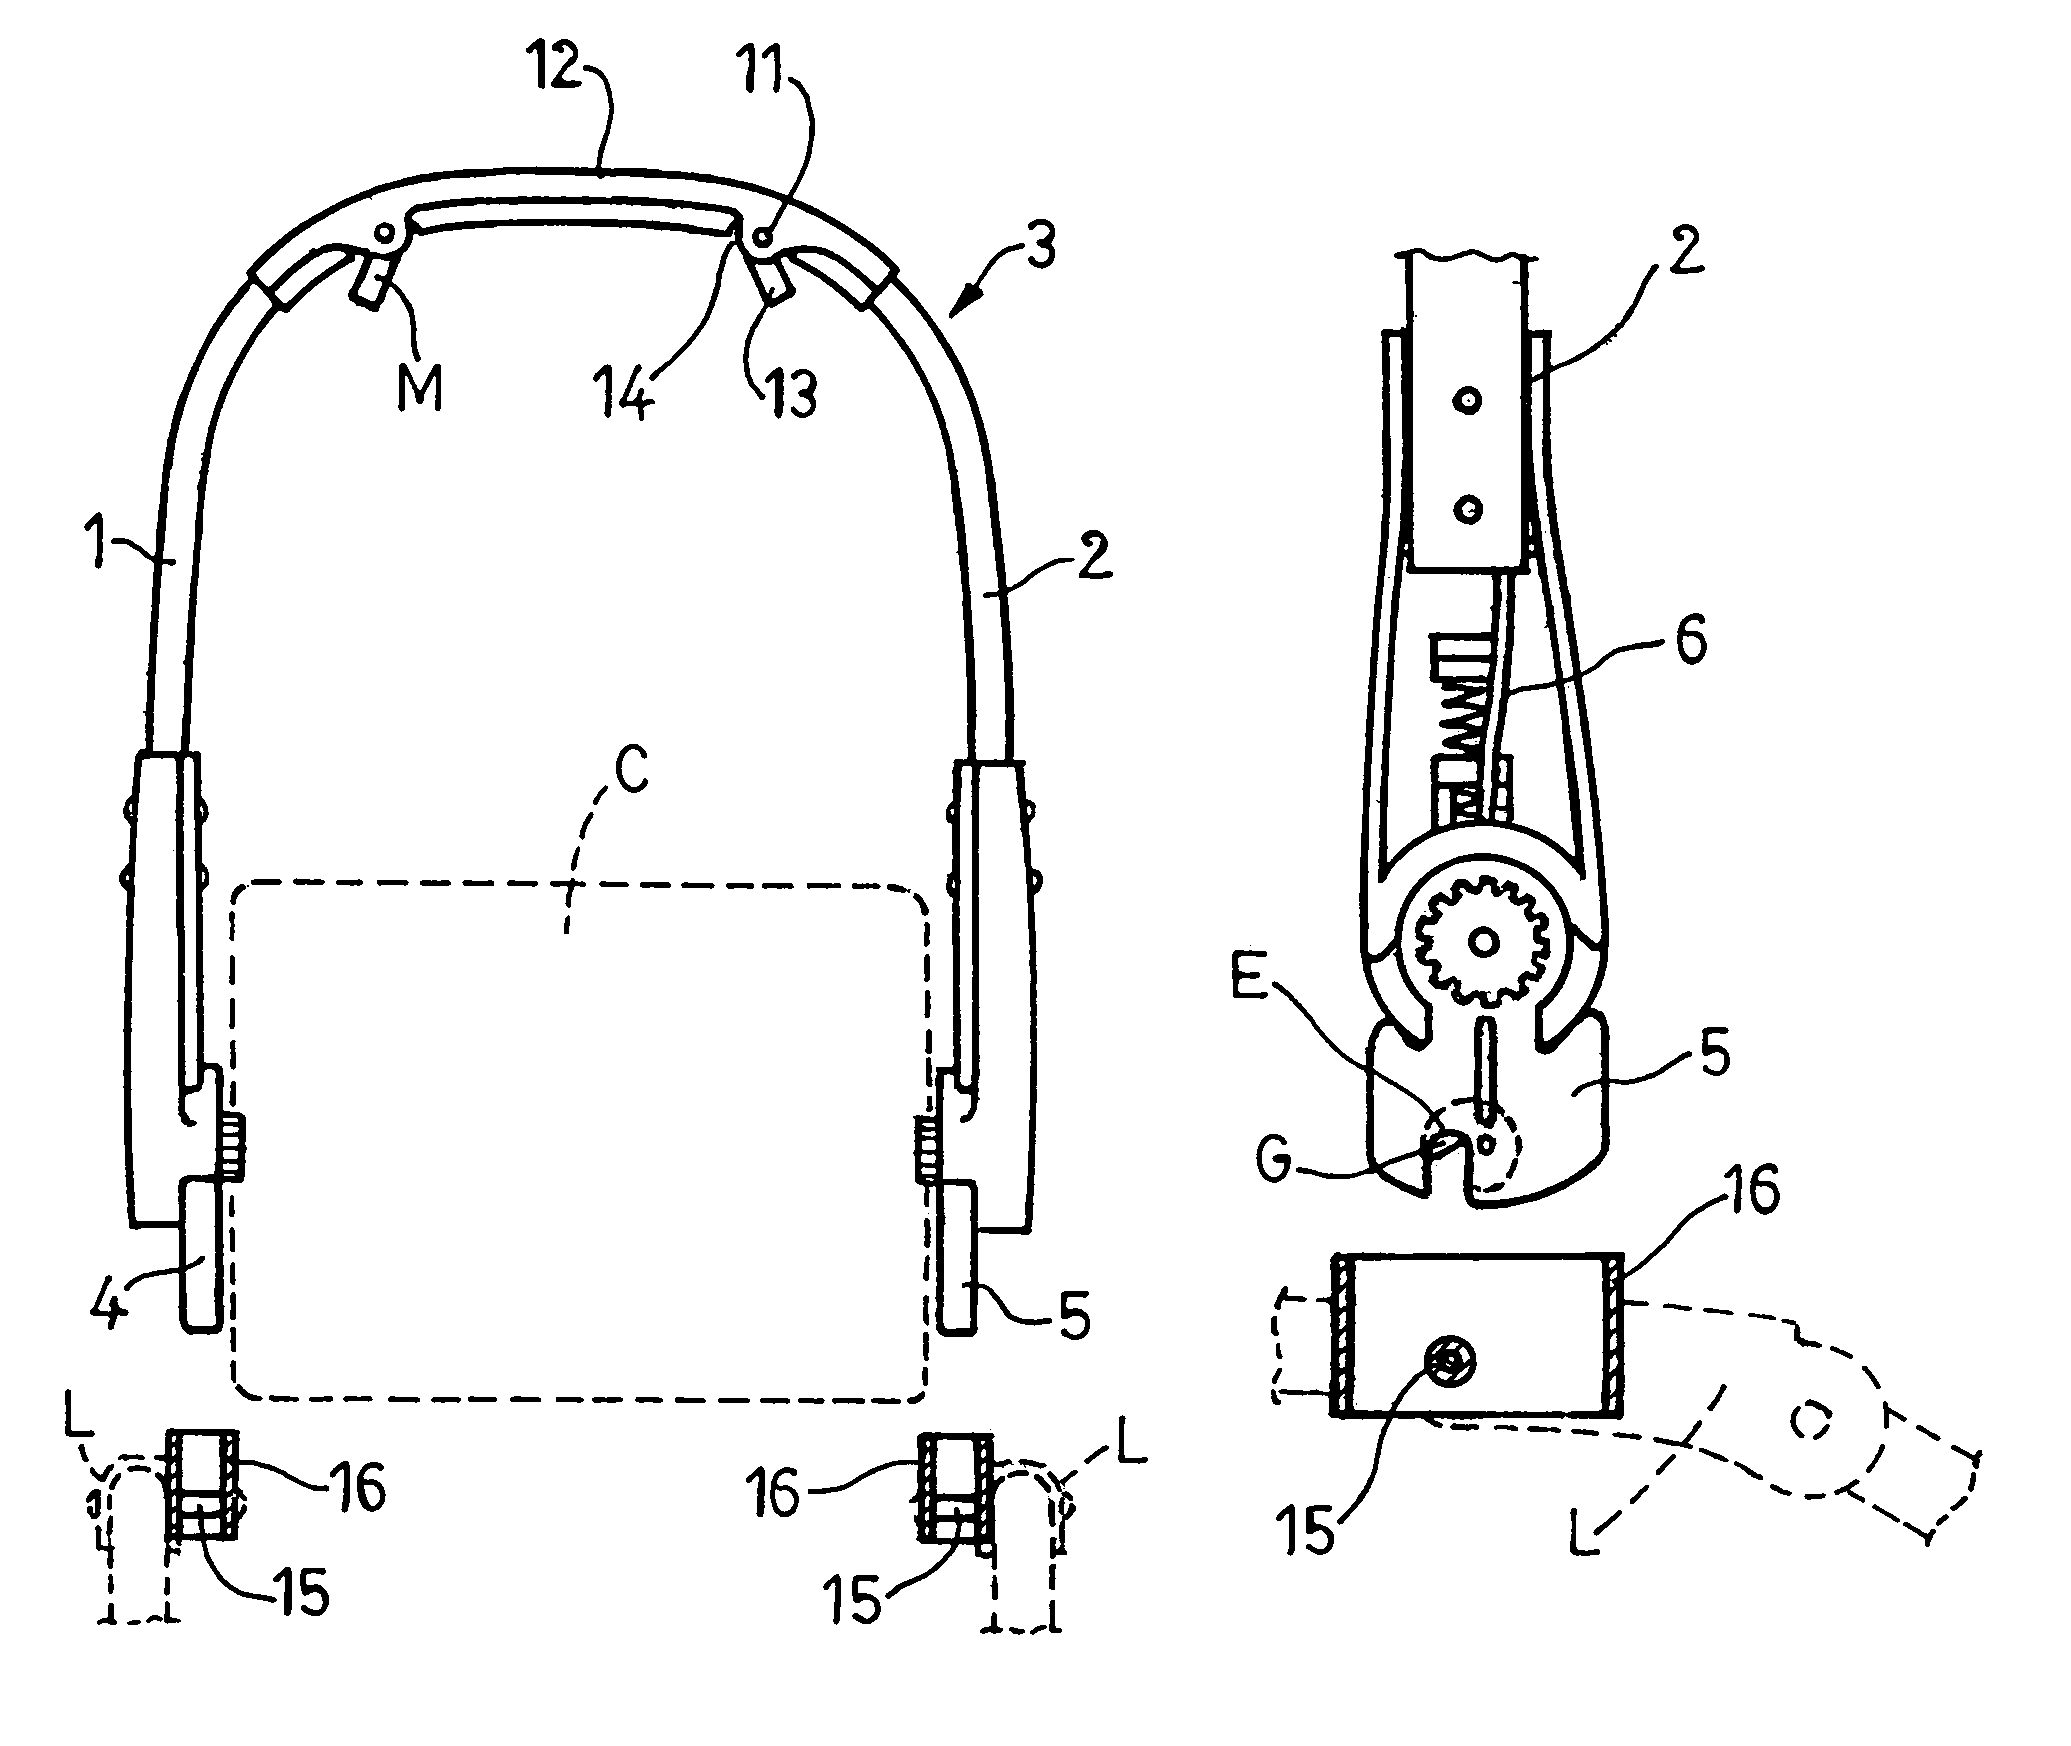 Device for removably fitting carrycot seats and carrycots to baby carriages